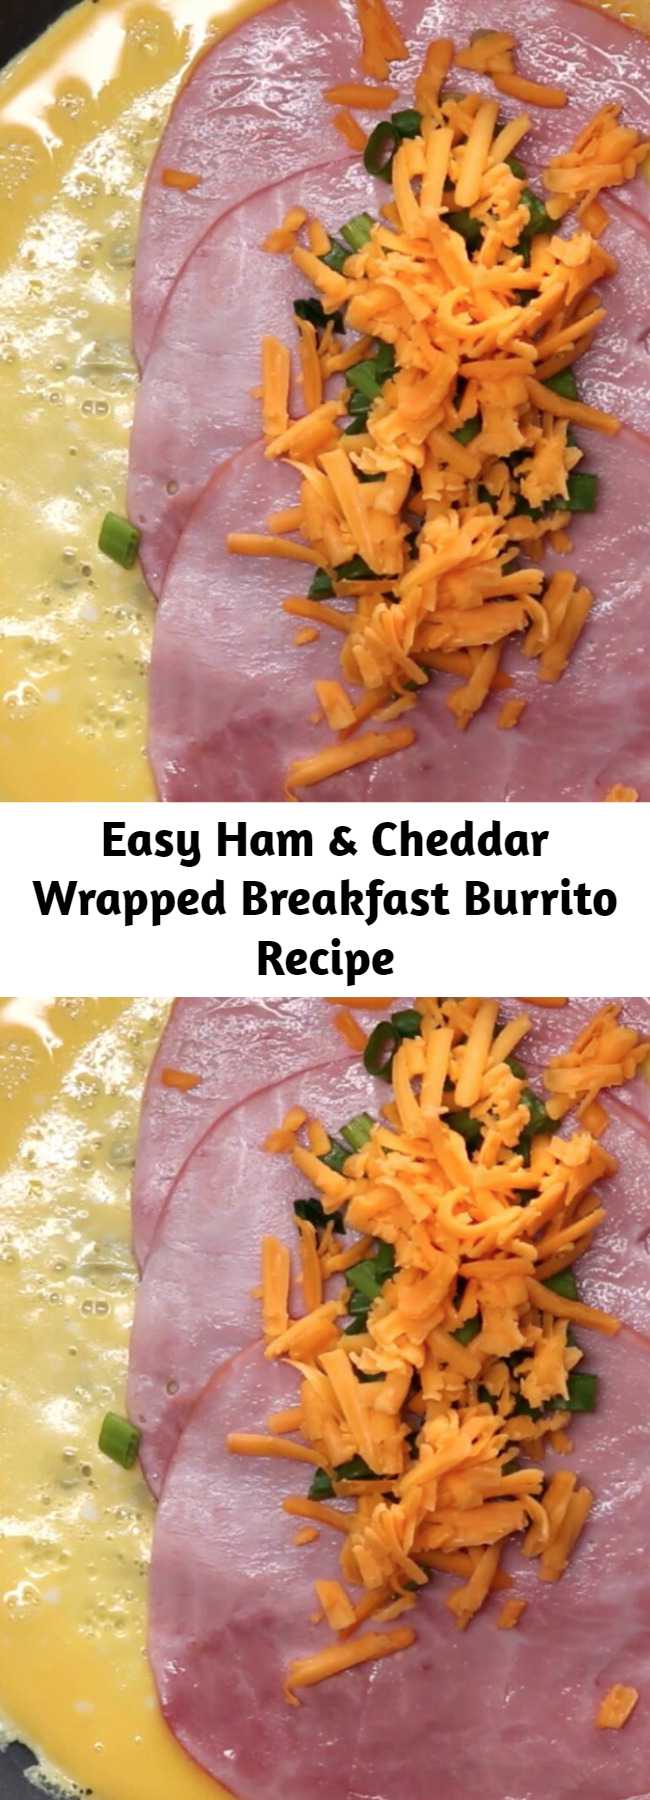 Easy Ham & Cheddar Wrapped Breakfast Burrito Recipe - You can make these freezable breakfast burritos in minutes. A delicious breakfast to go.